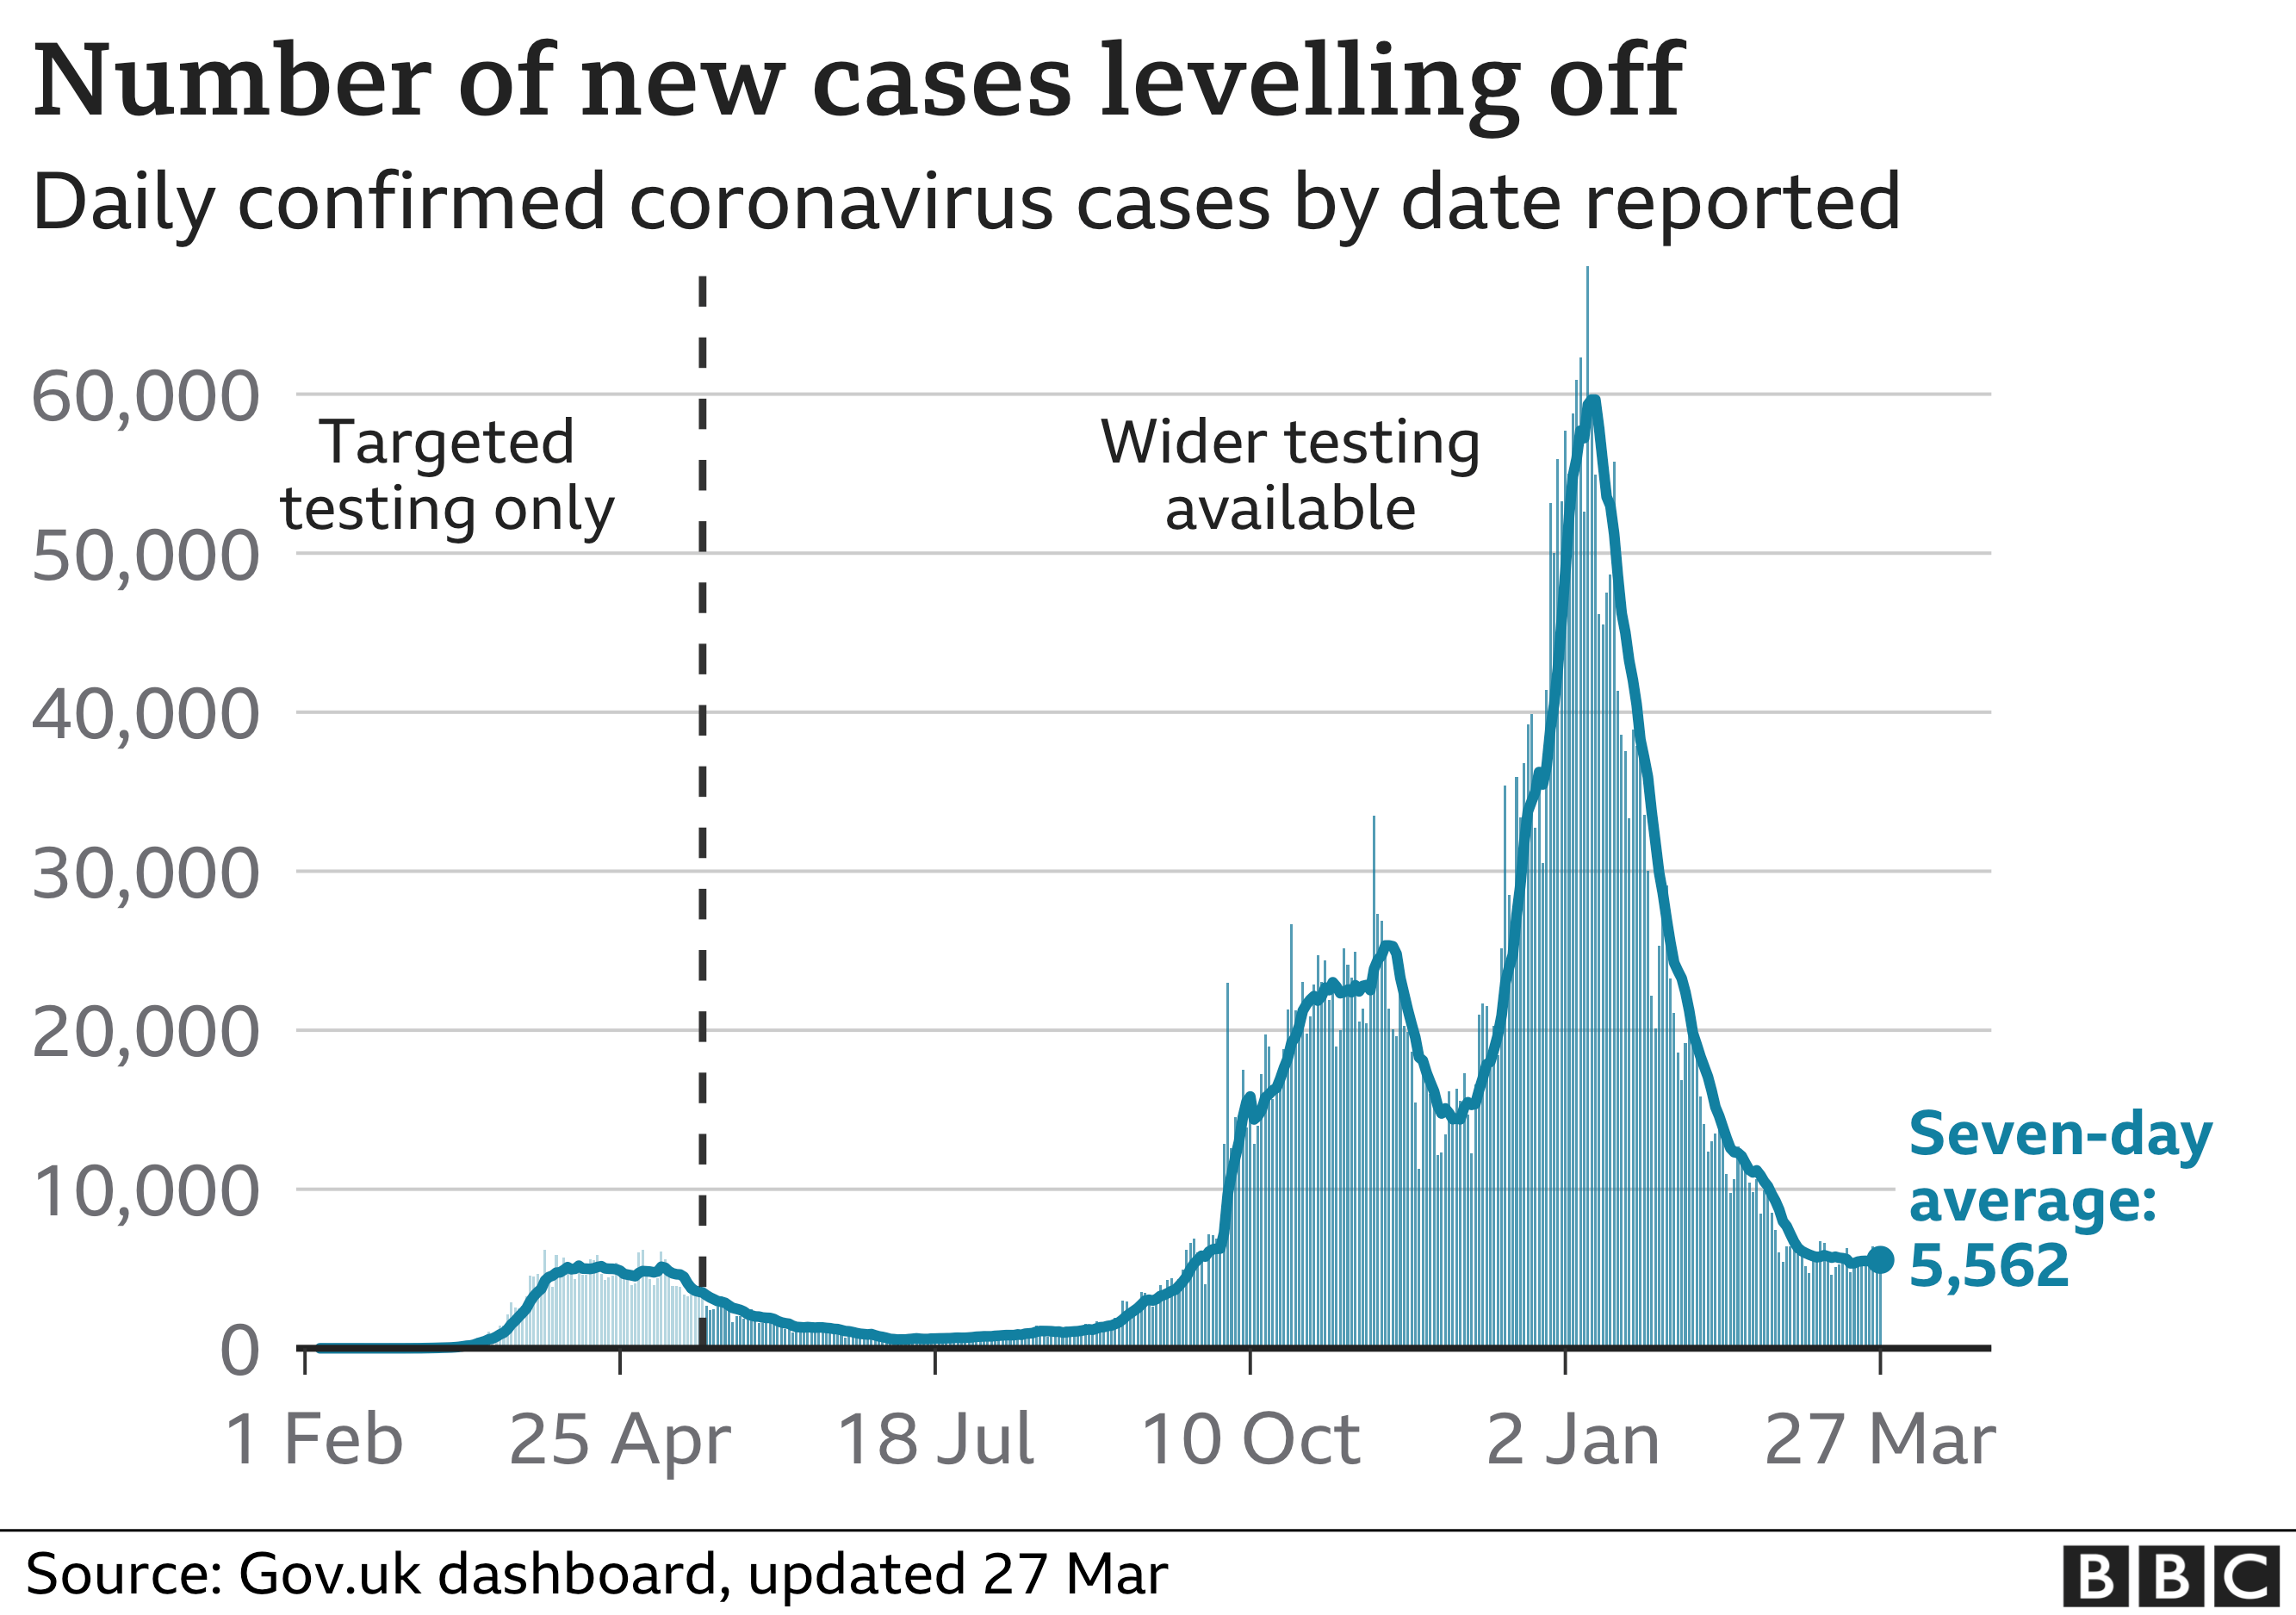 A graph showing the number of new cases in the UK